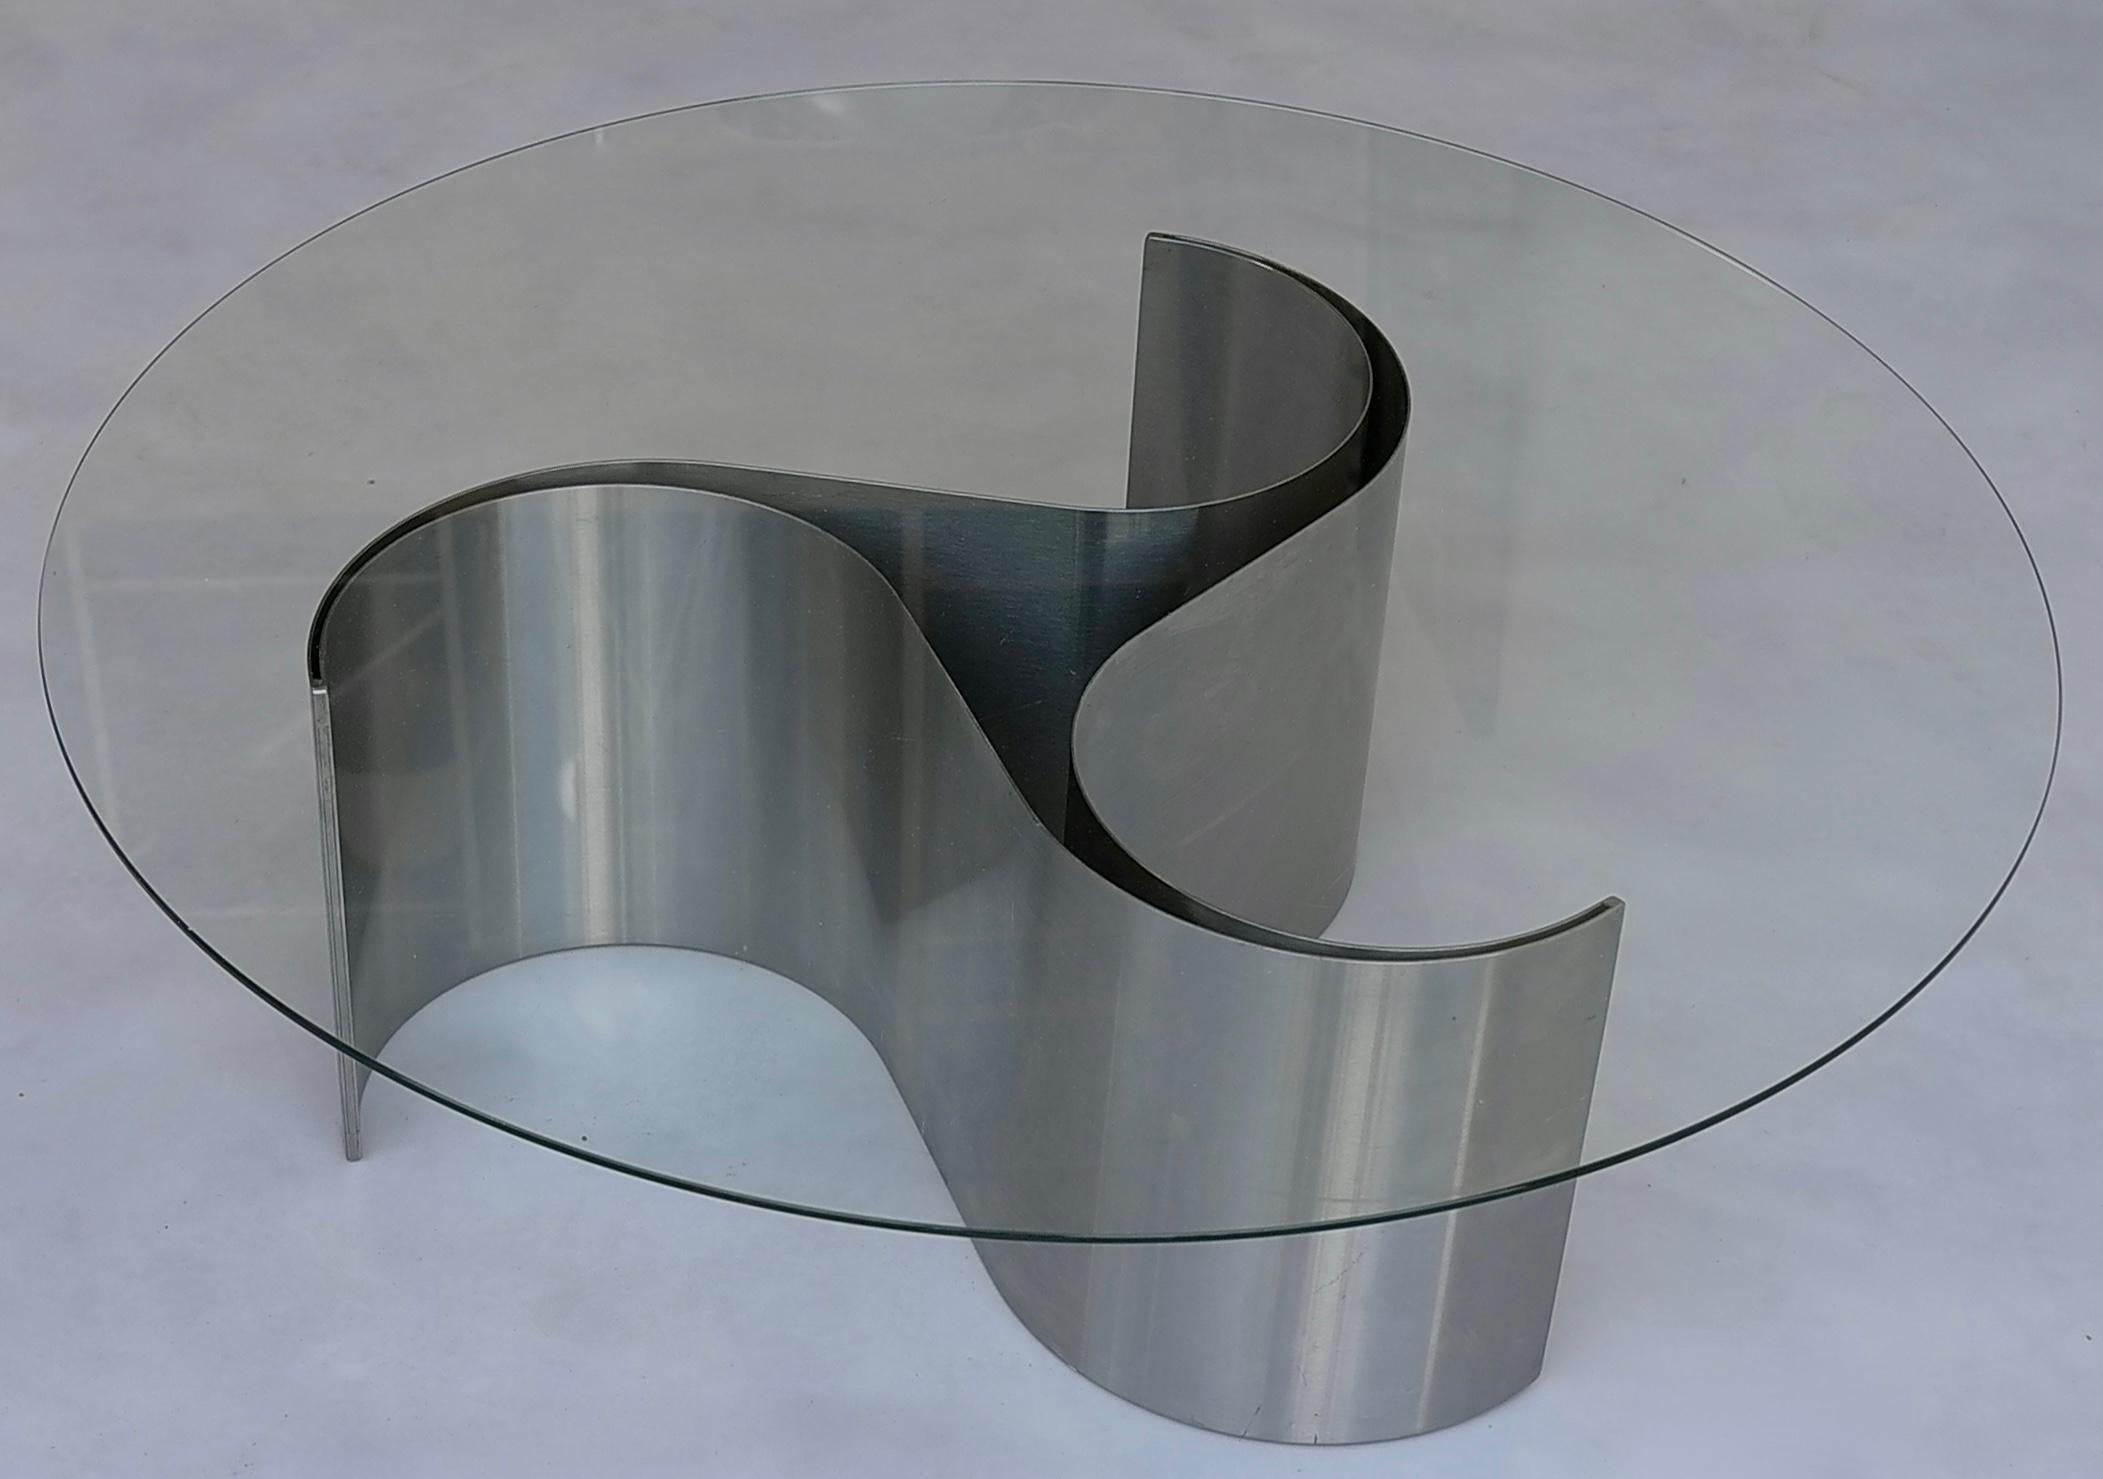 Sculptural coffee table model 'Comete' in glass and steel by Patrice Maffei, France, 1970s.